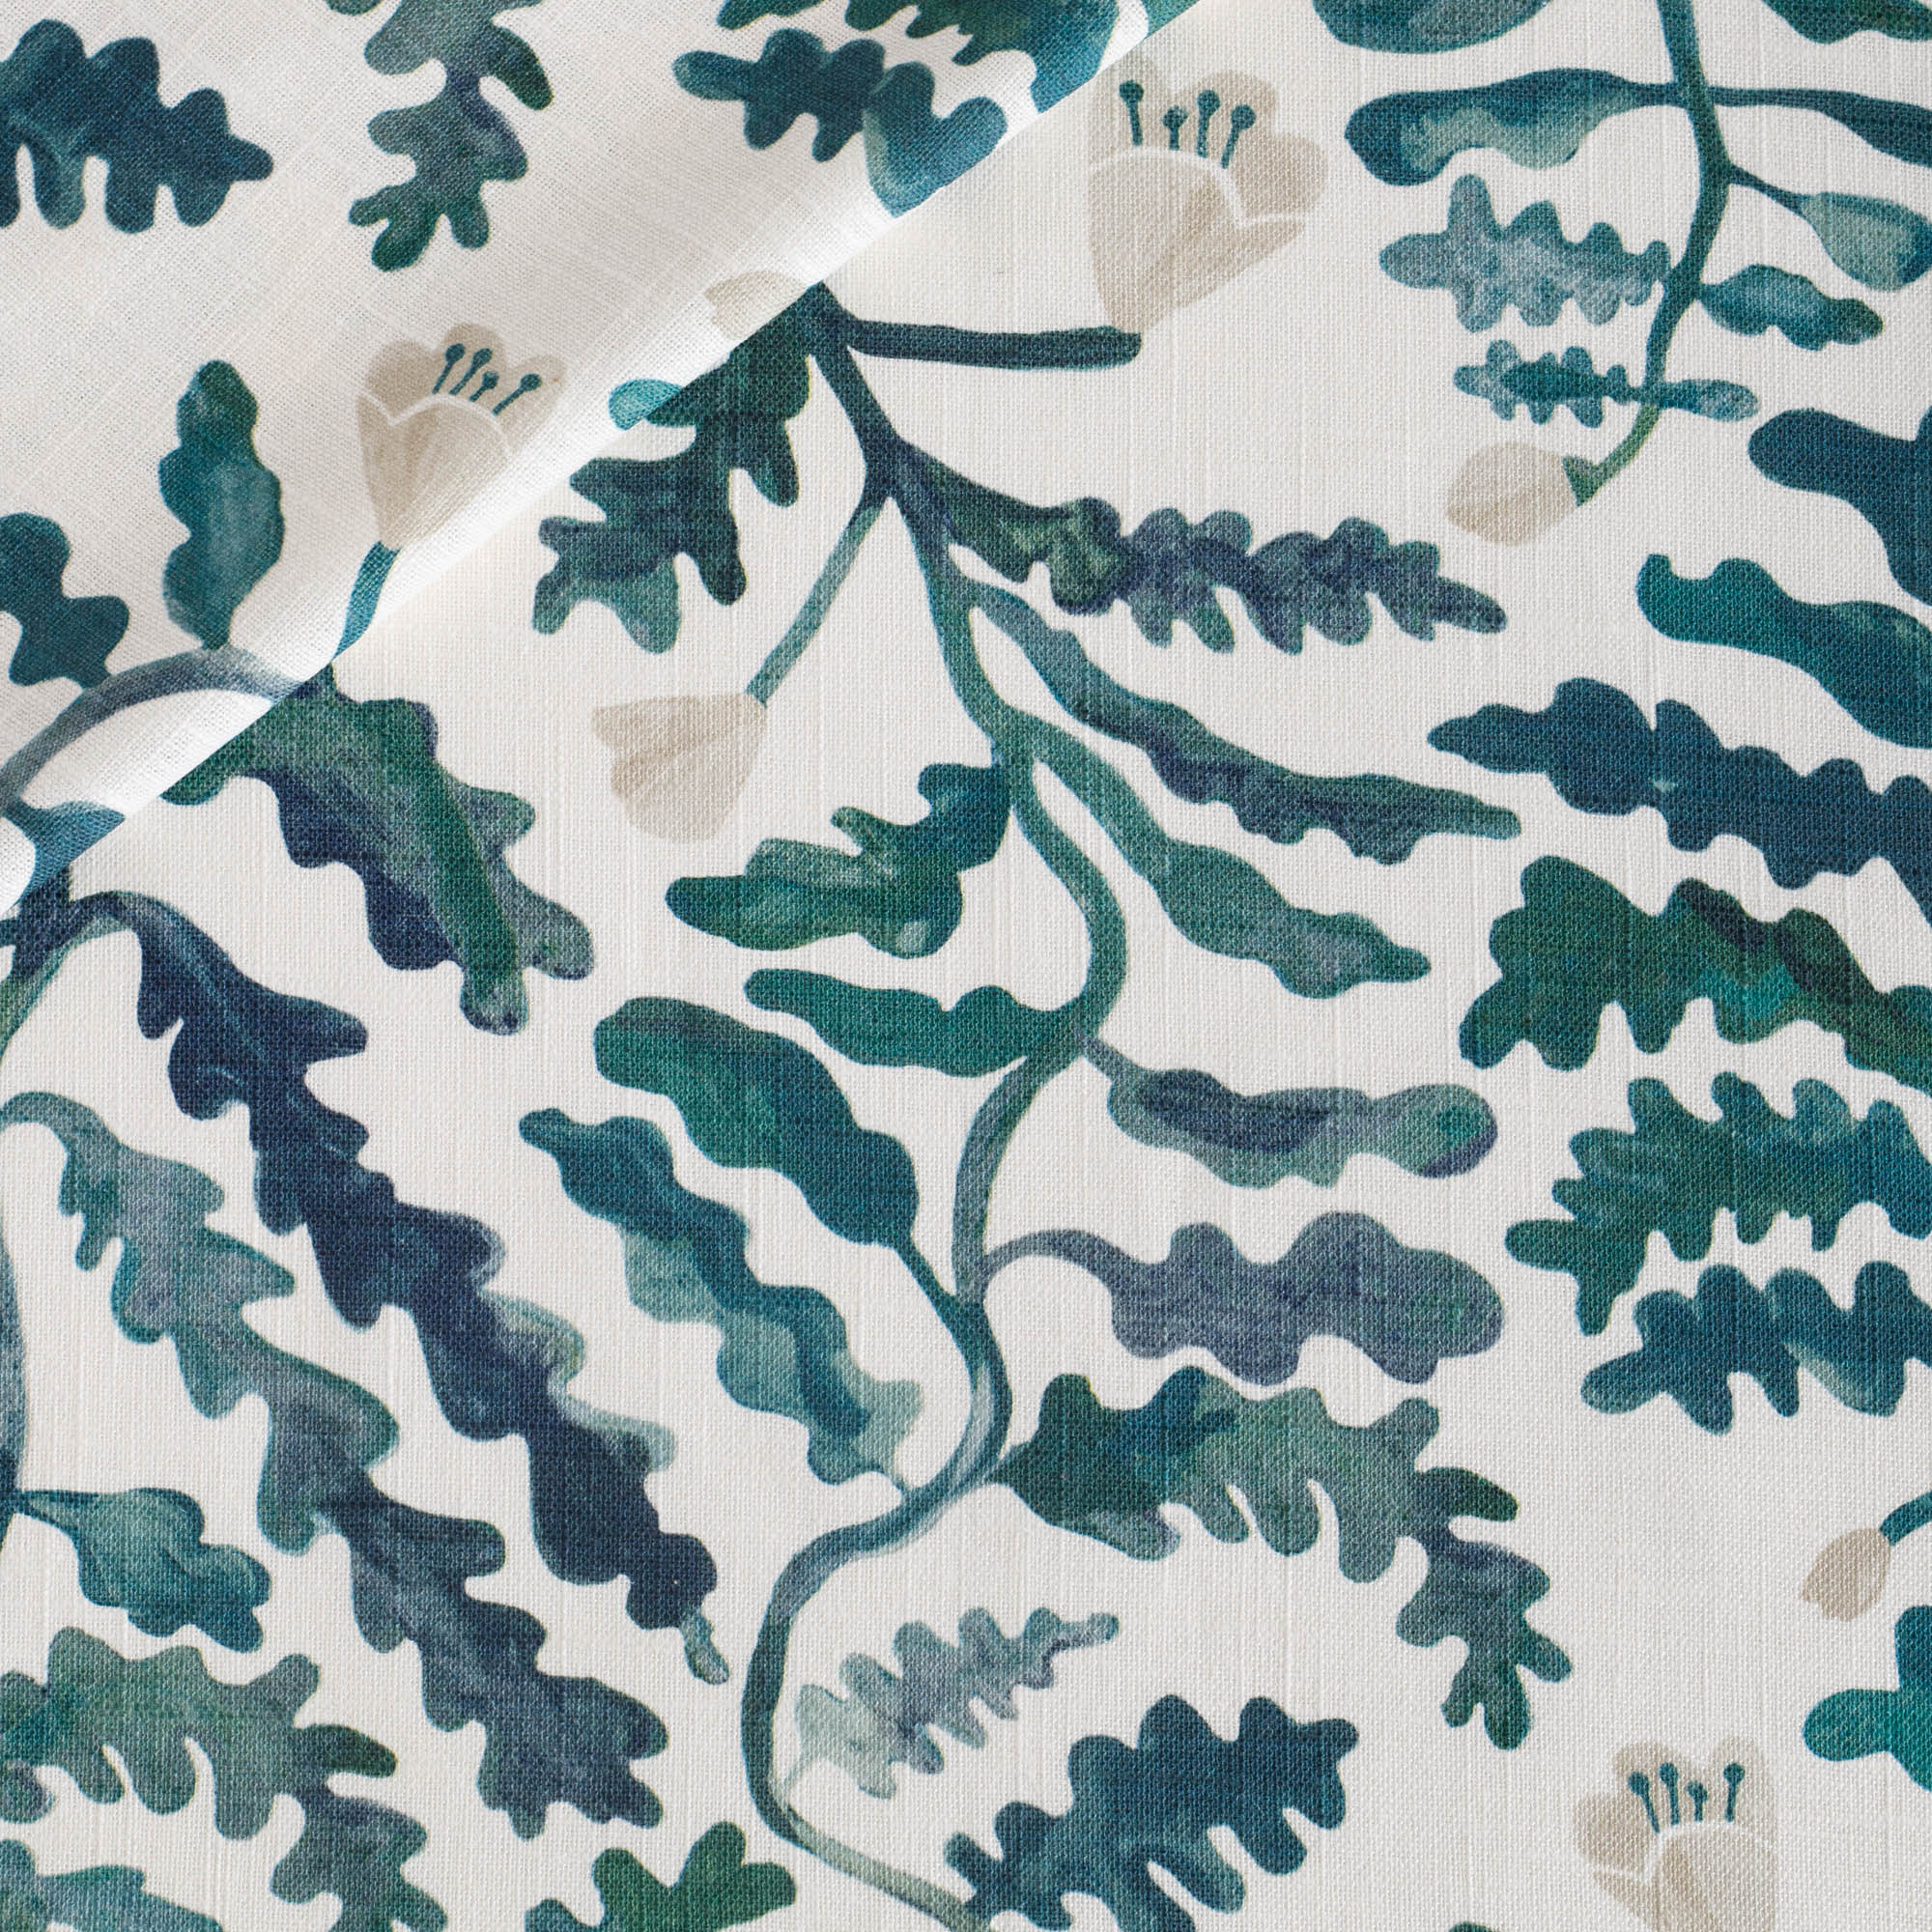 Lola Fabric, a teal and forest green and white leafy botanical linen blend fabric from Tonic Living